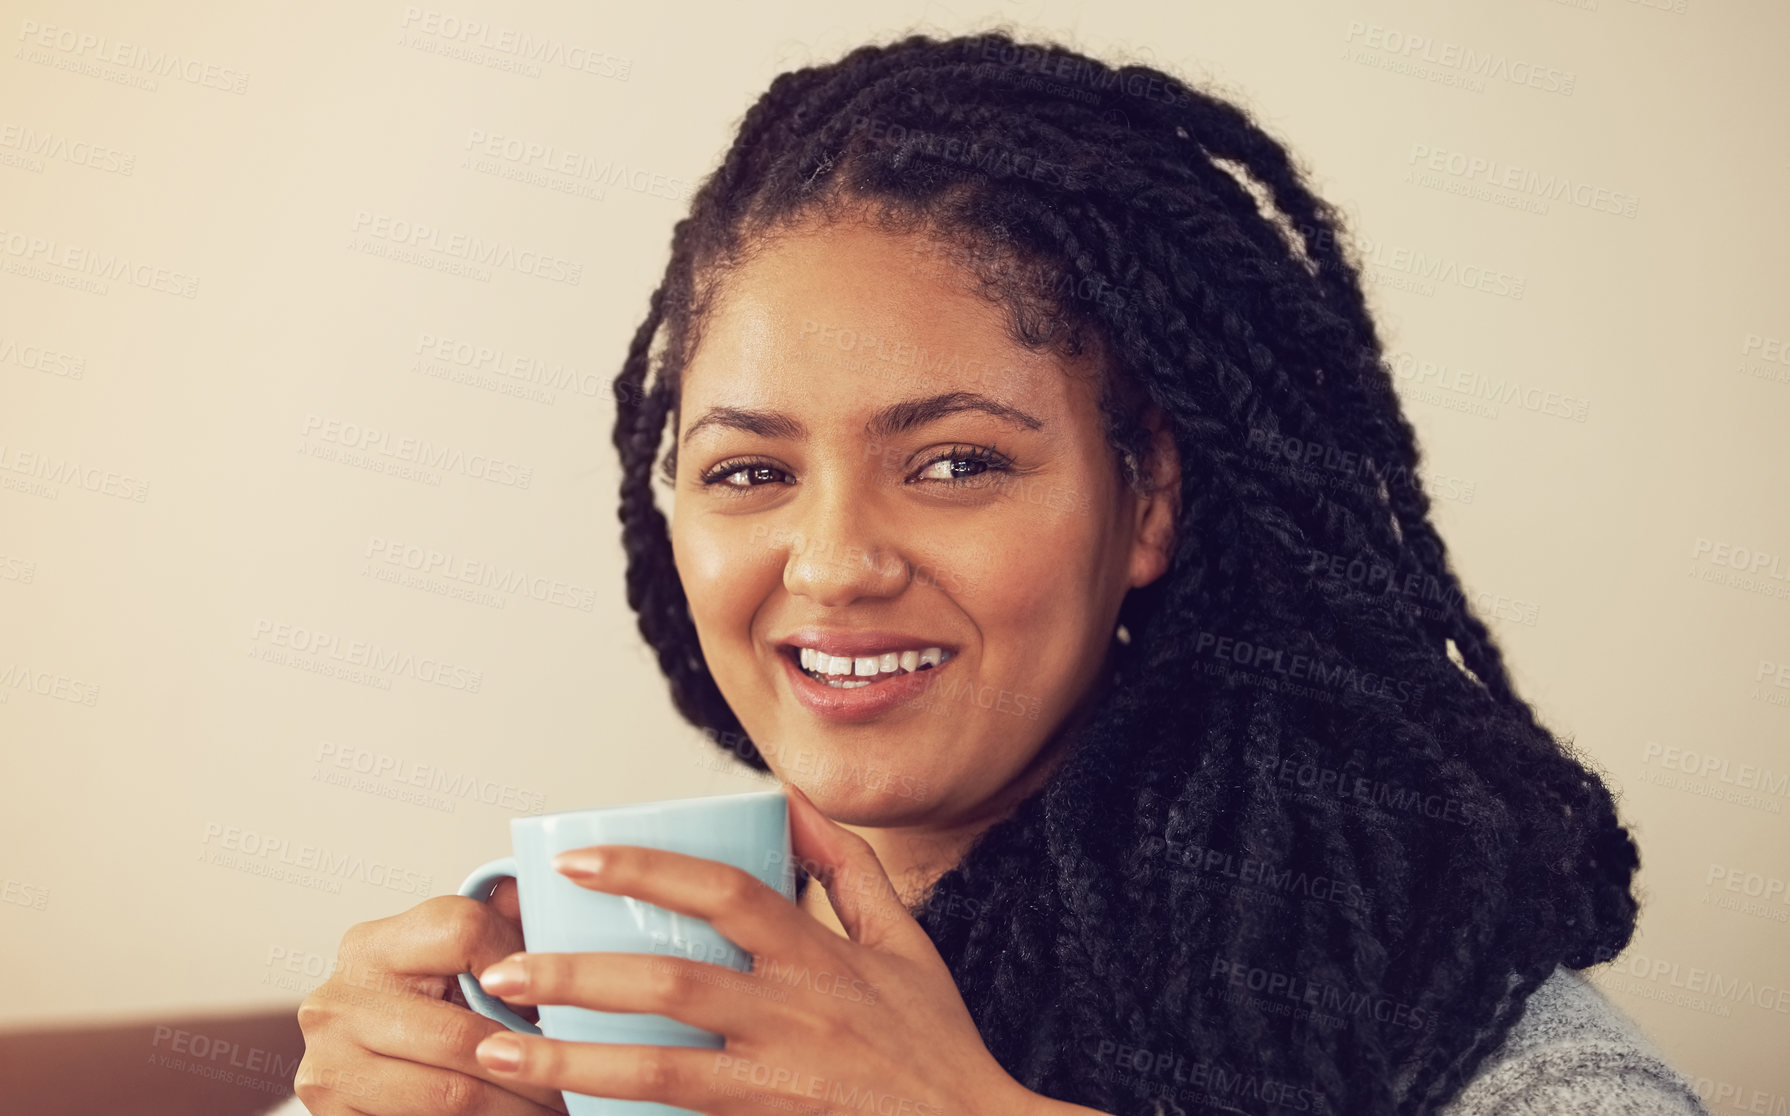 Buy stock photo Shot of a young woman enjoying a cup of coffee in her living room